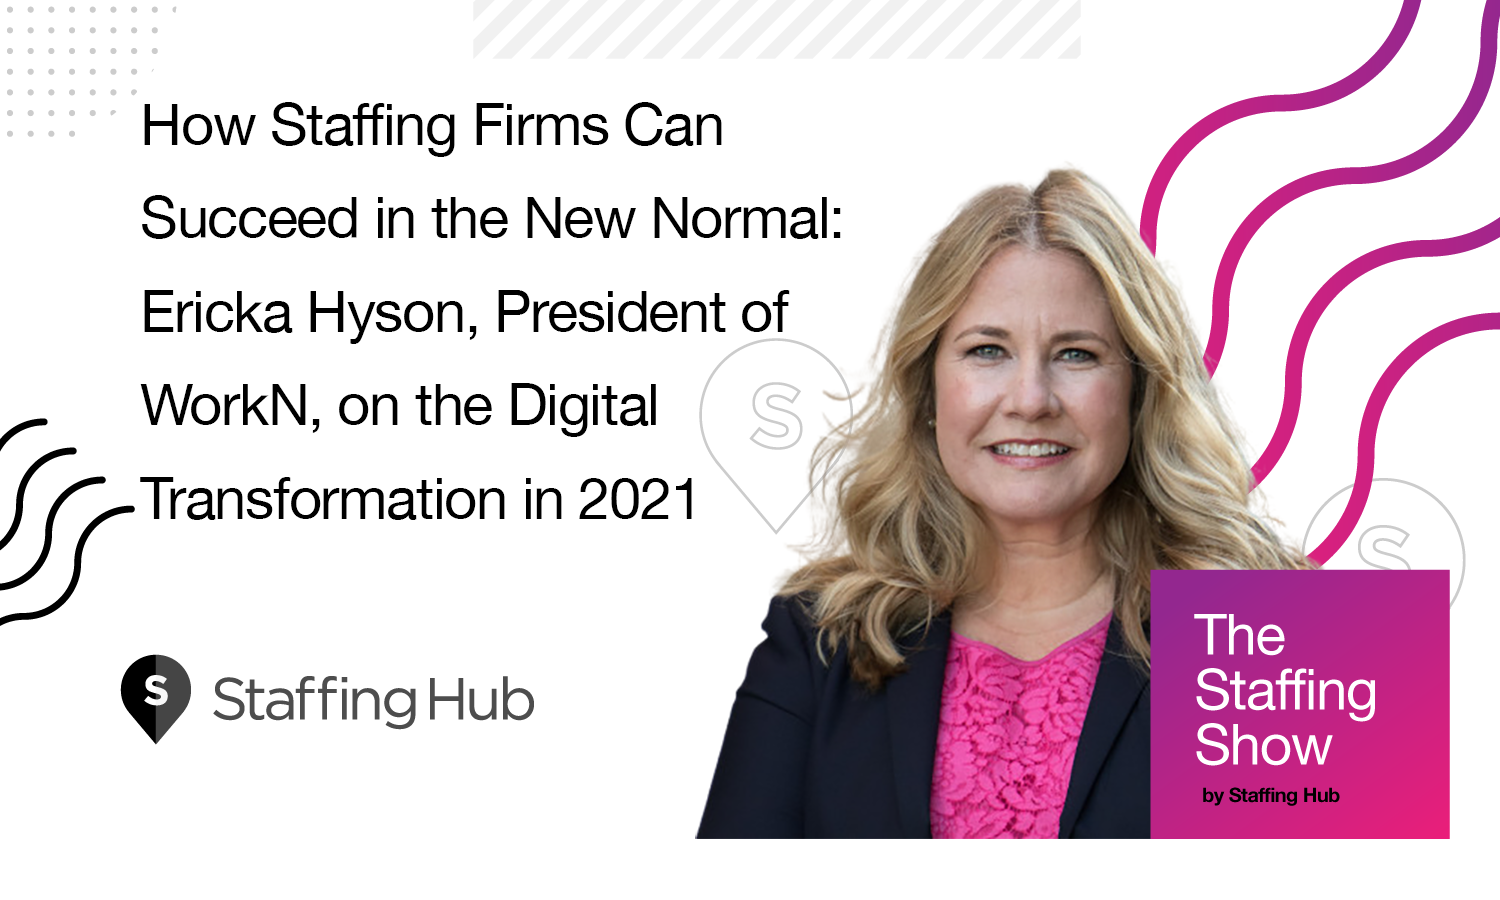 How Staffing Firms Can Succeed in the New Normal: Ericka Hyson, President of WorkN, on the Digital Transformation in 2021